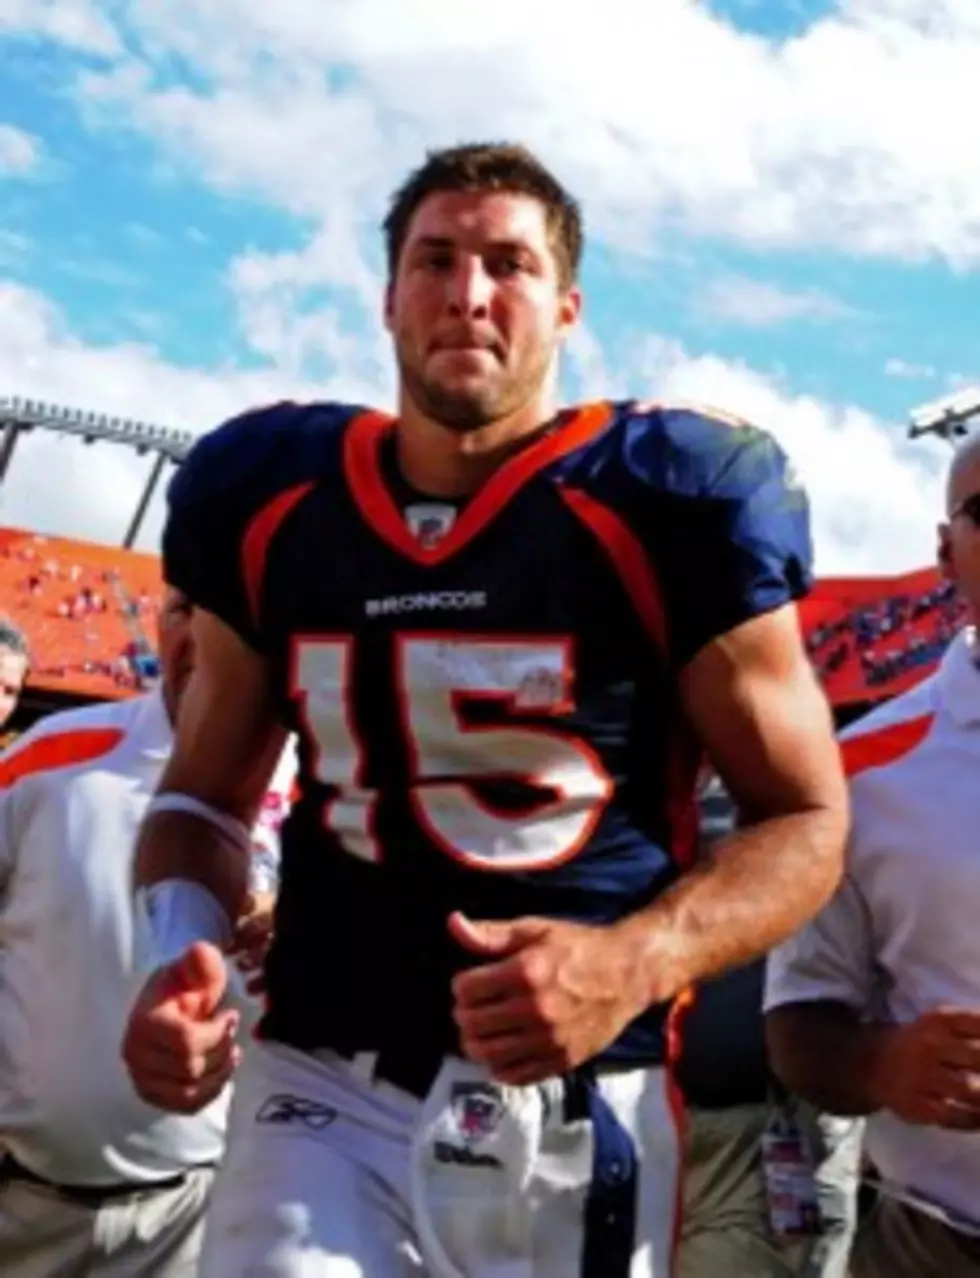 Tim Tebow Vindicates Both Fans and Critics With Win Over Dolphins